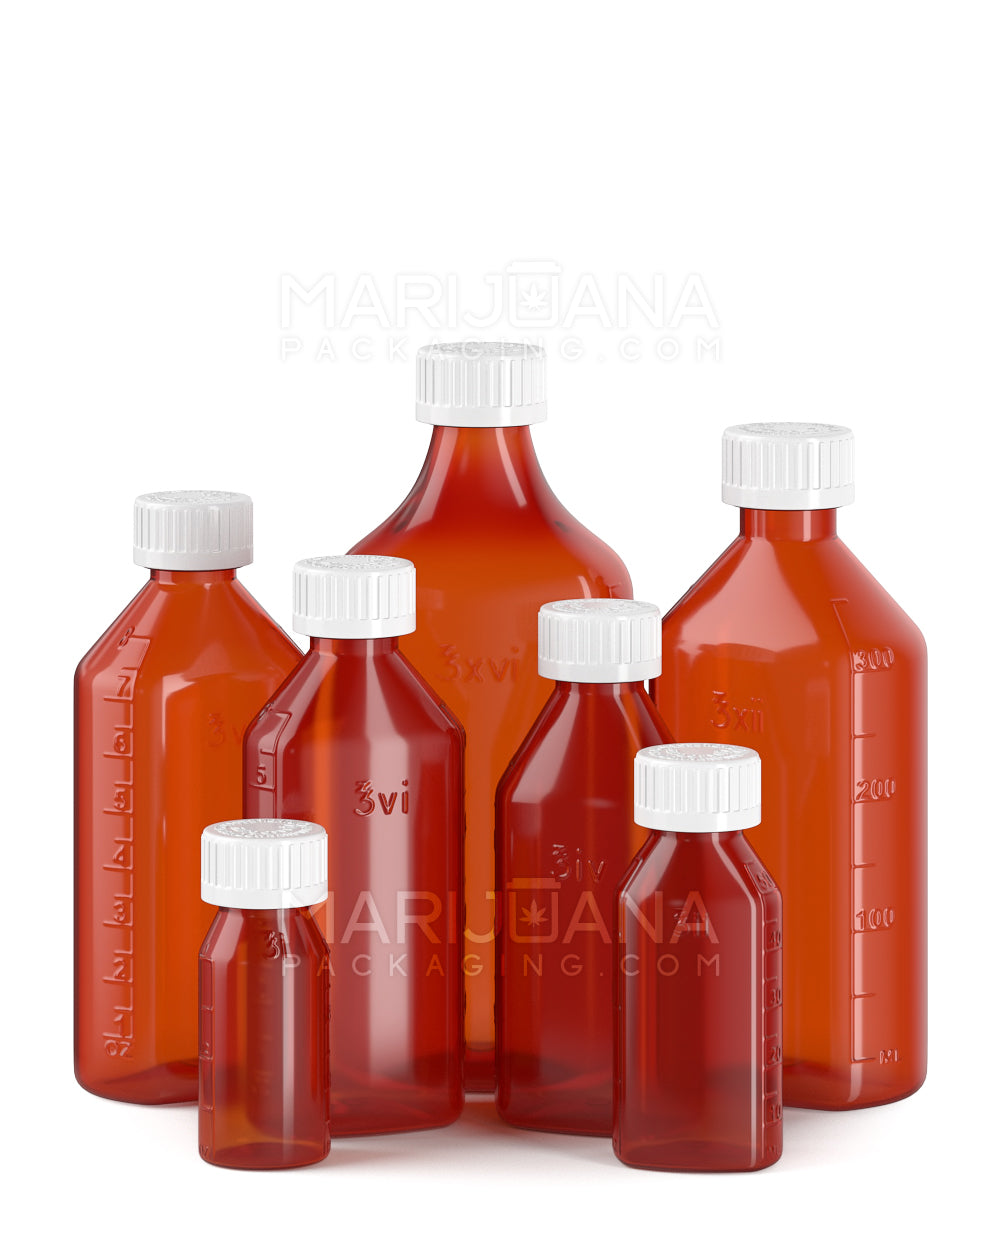 Child Resistant | Push Down & Turn Plastic Syrup Bottles w/ Oral Adapters | 4oz - Amber - 120 Count - 5